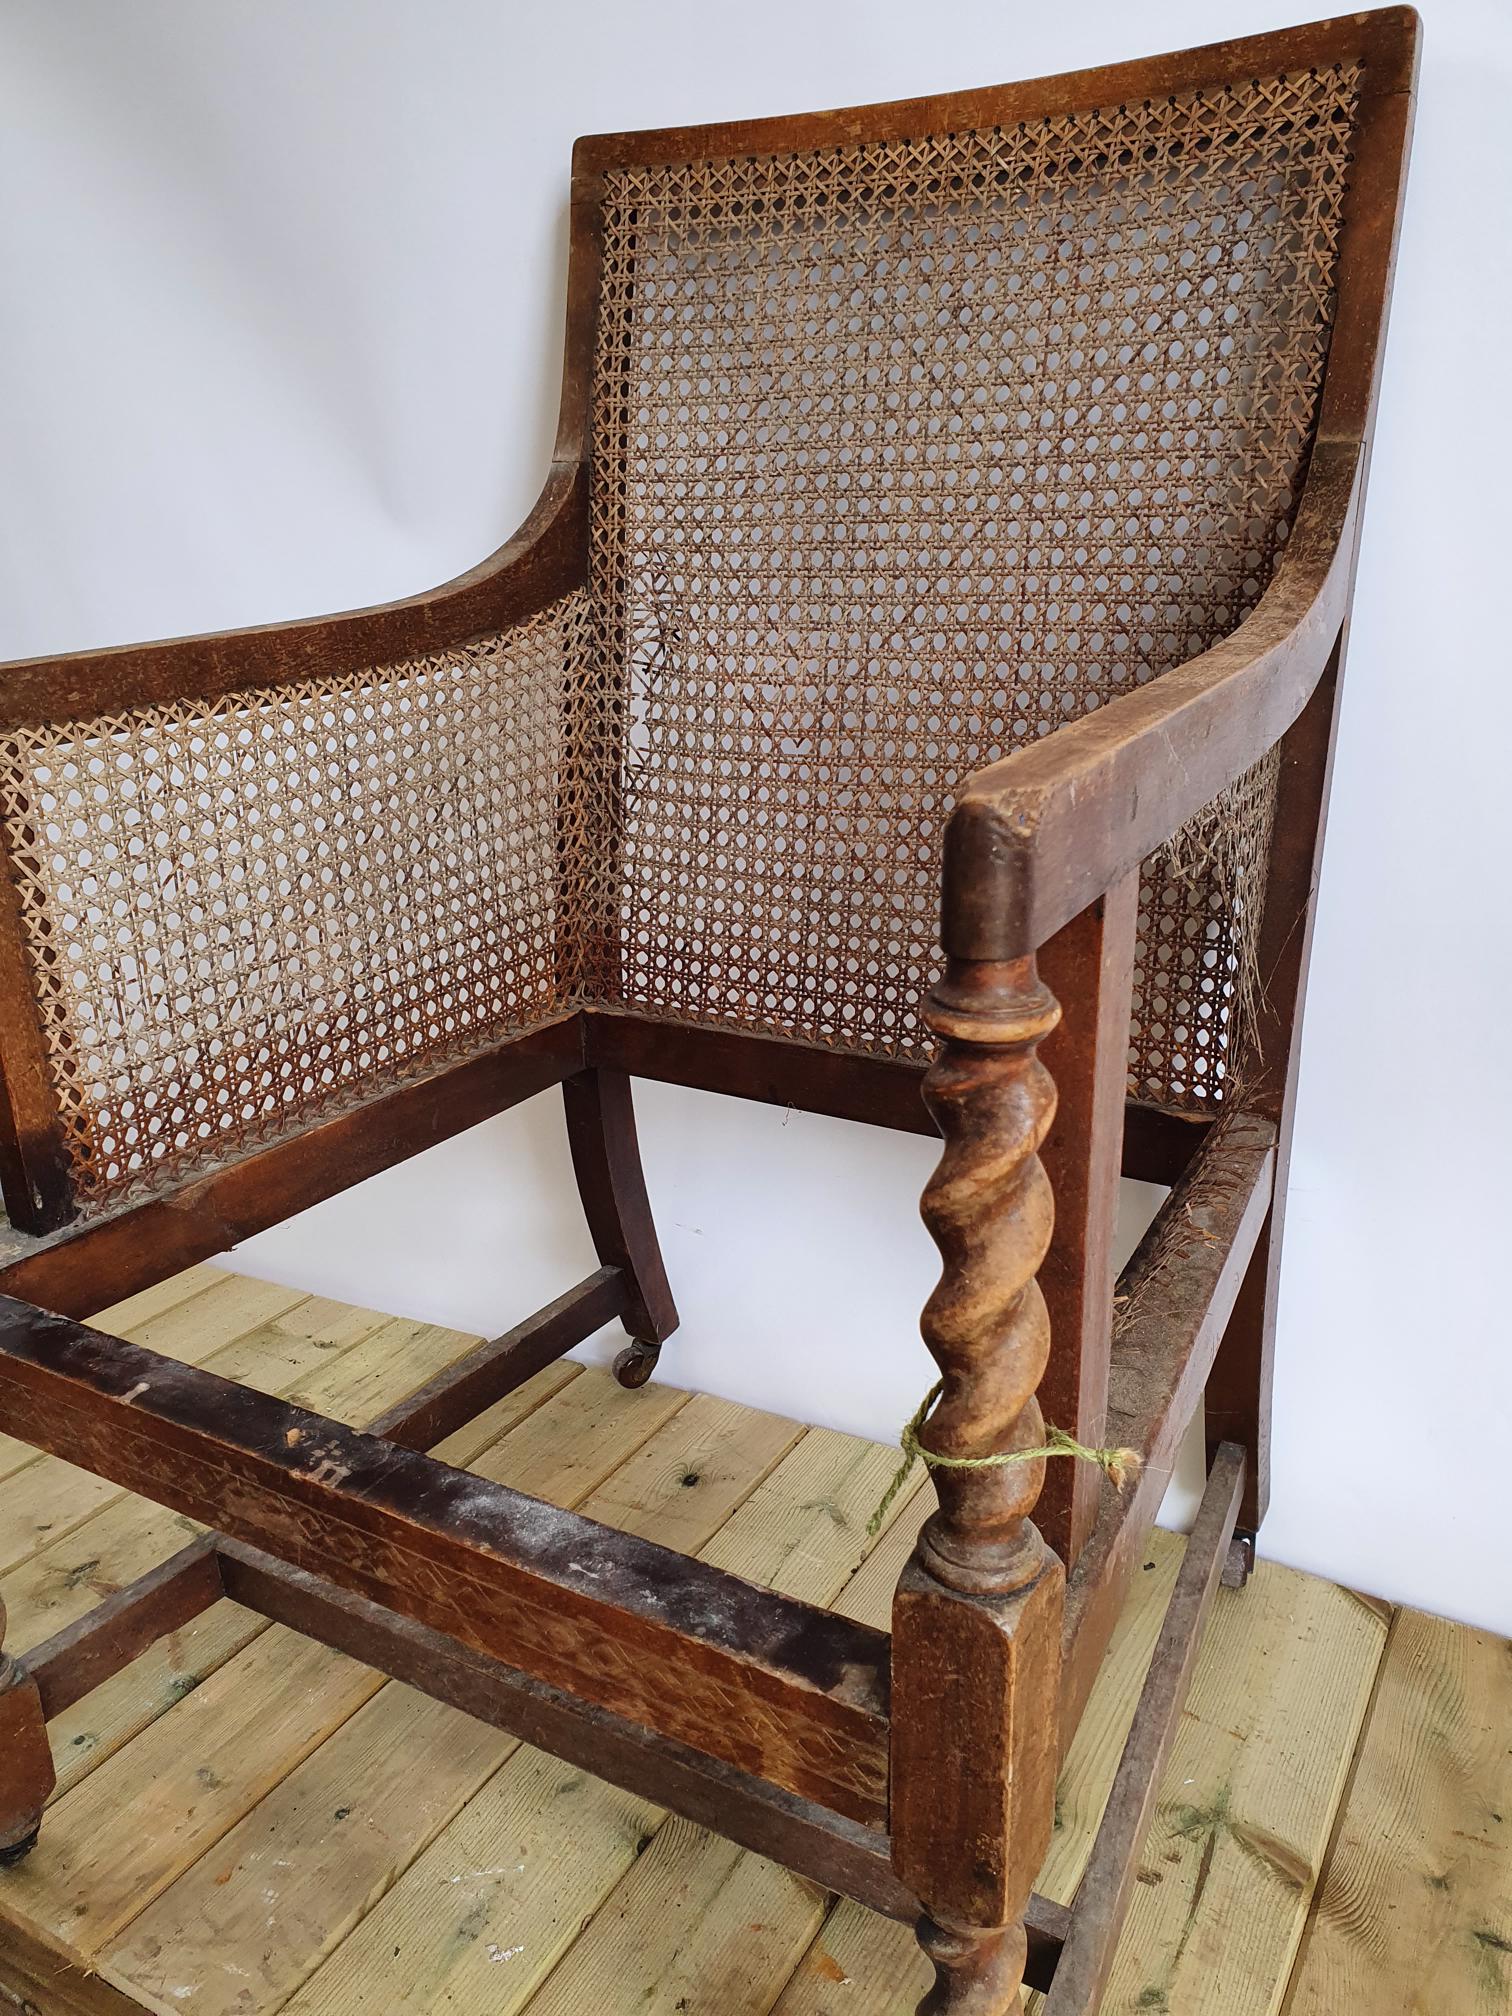 Rattan Chair - Image 2 of 3